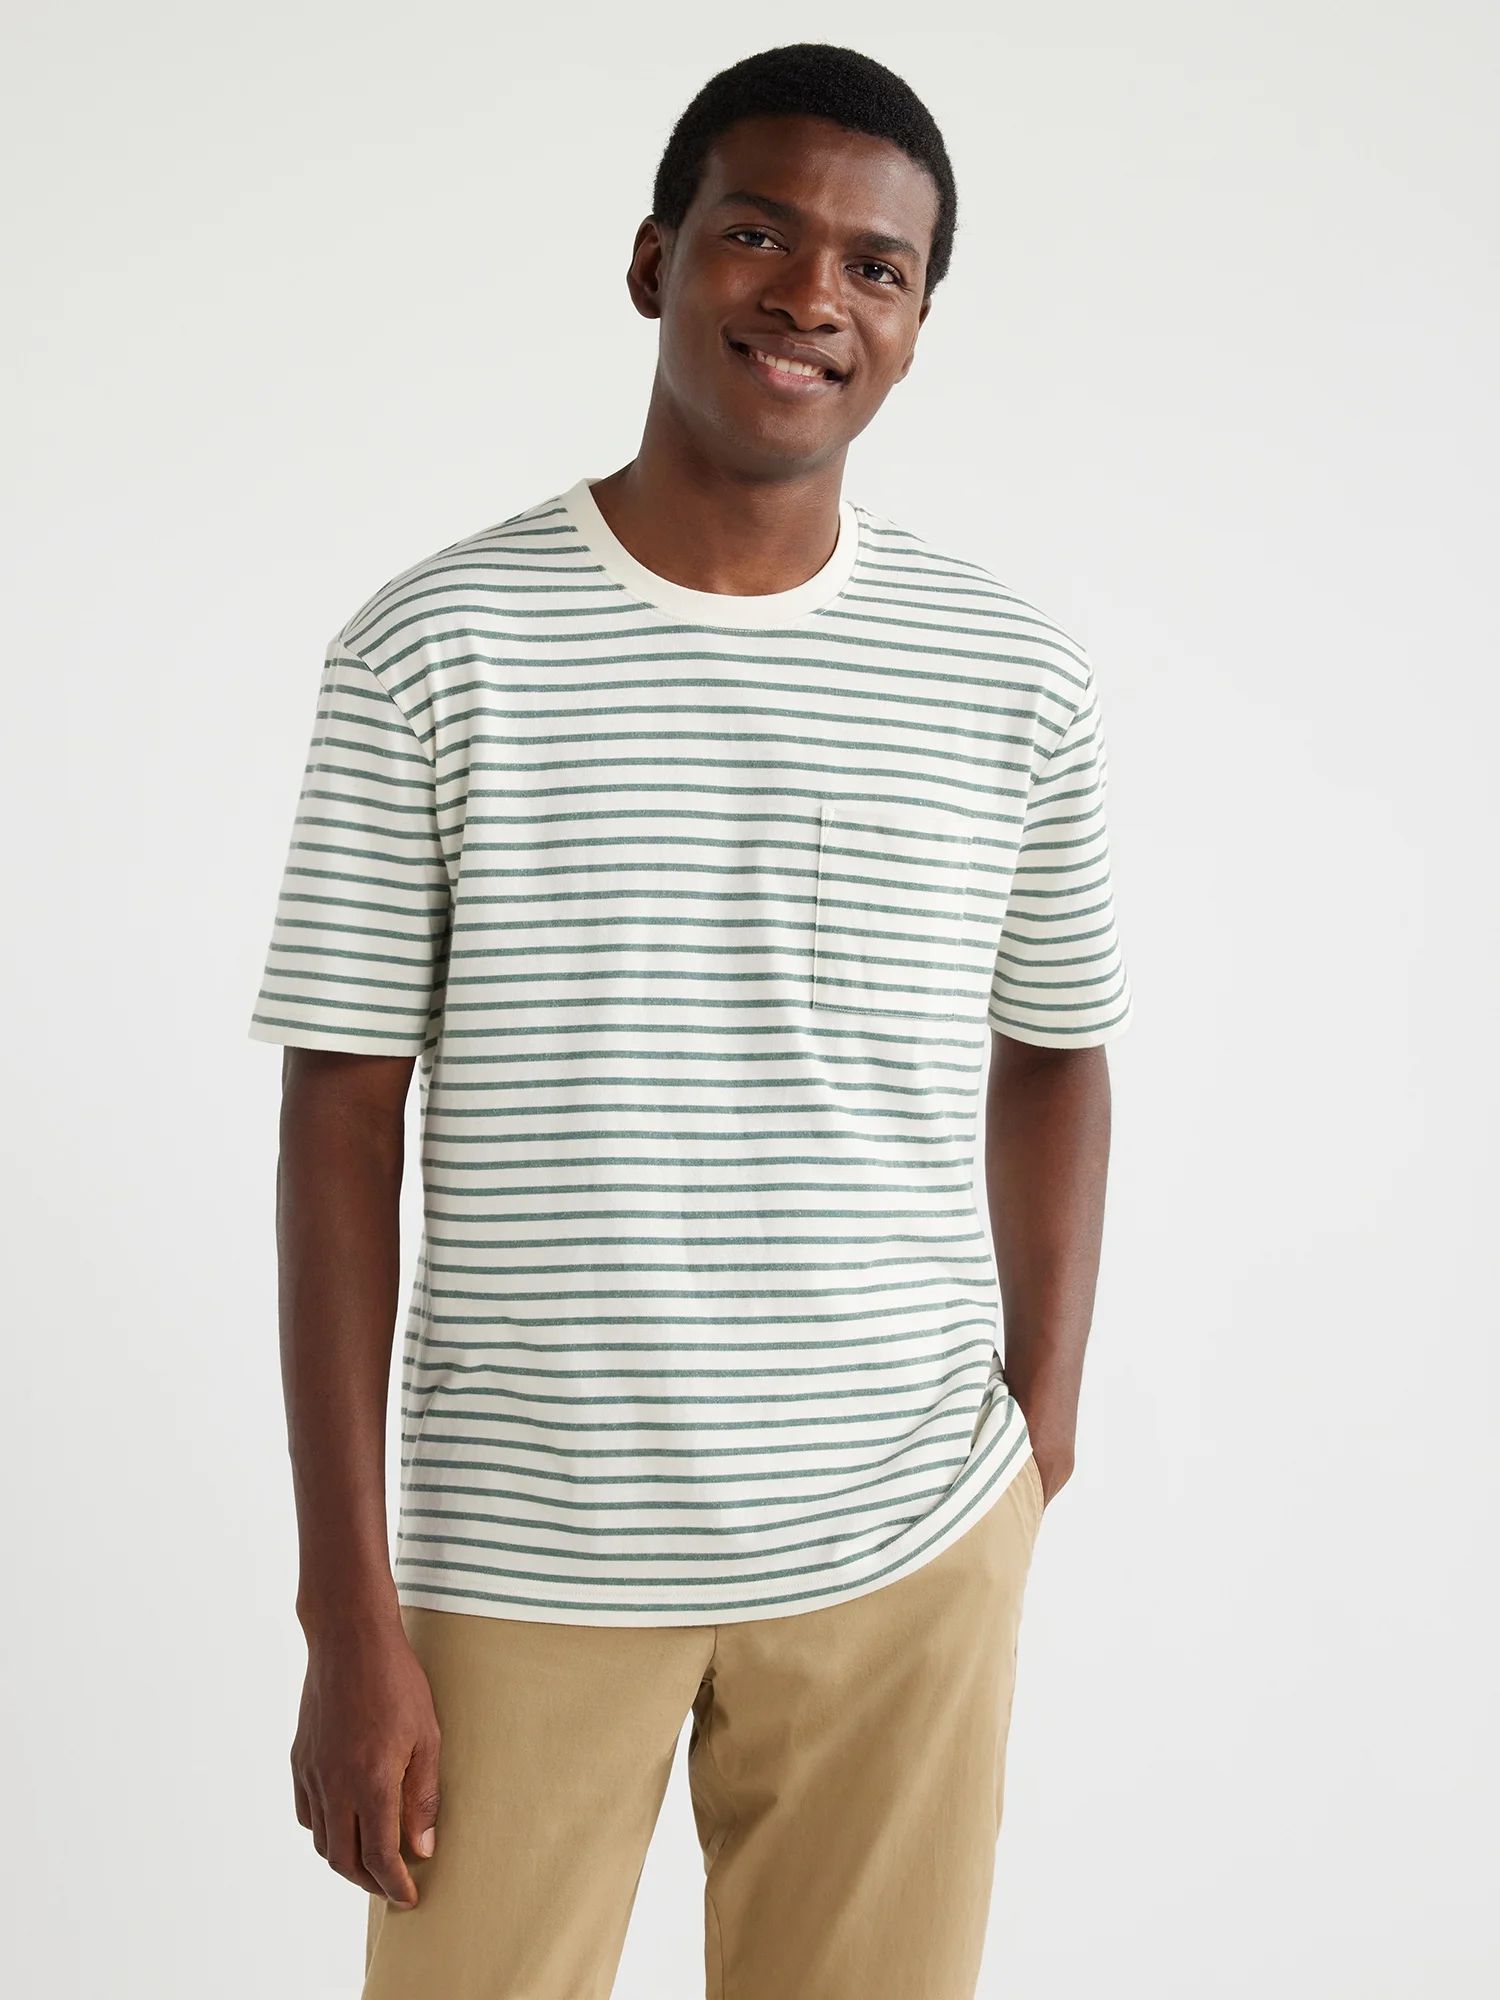 Free Assembly Men's Oversized Pocket Tee with Short Sleeves, Sizes S-3XL | Walmart (US)